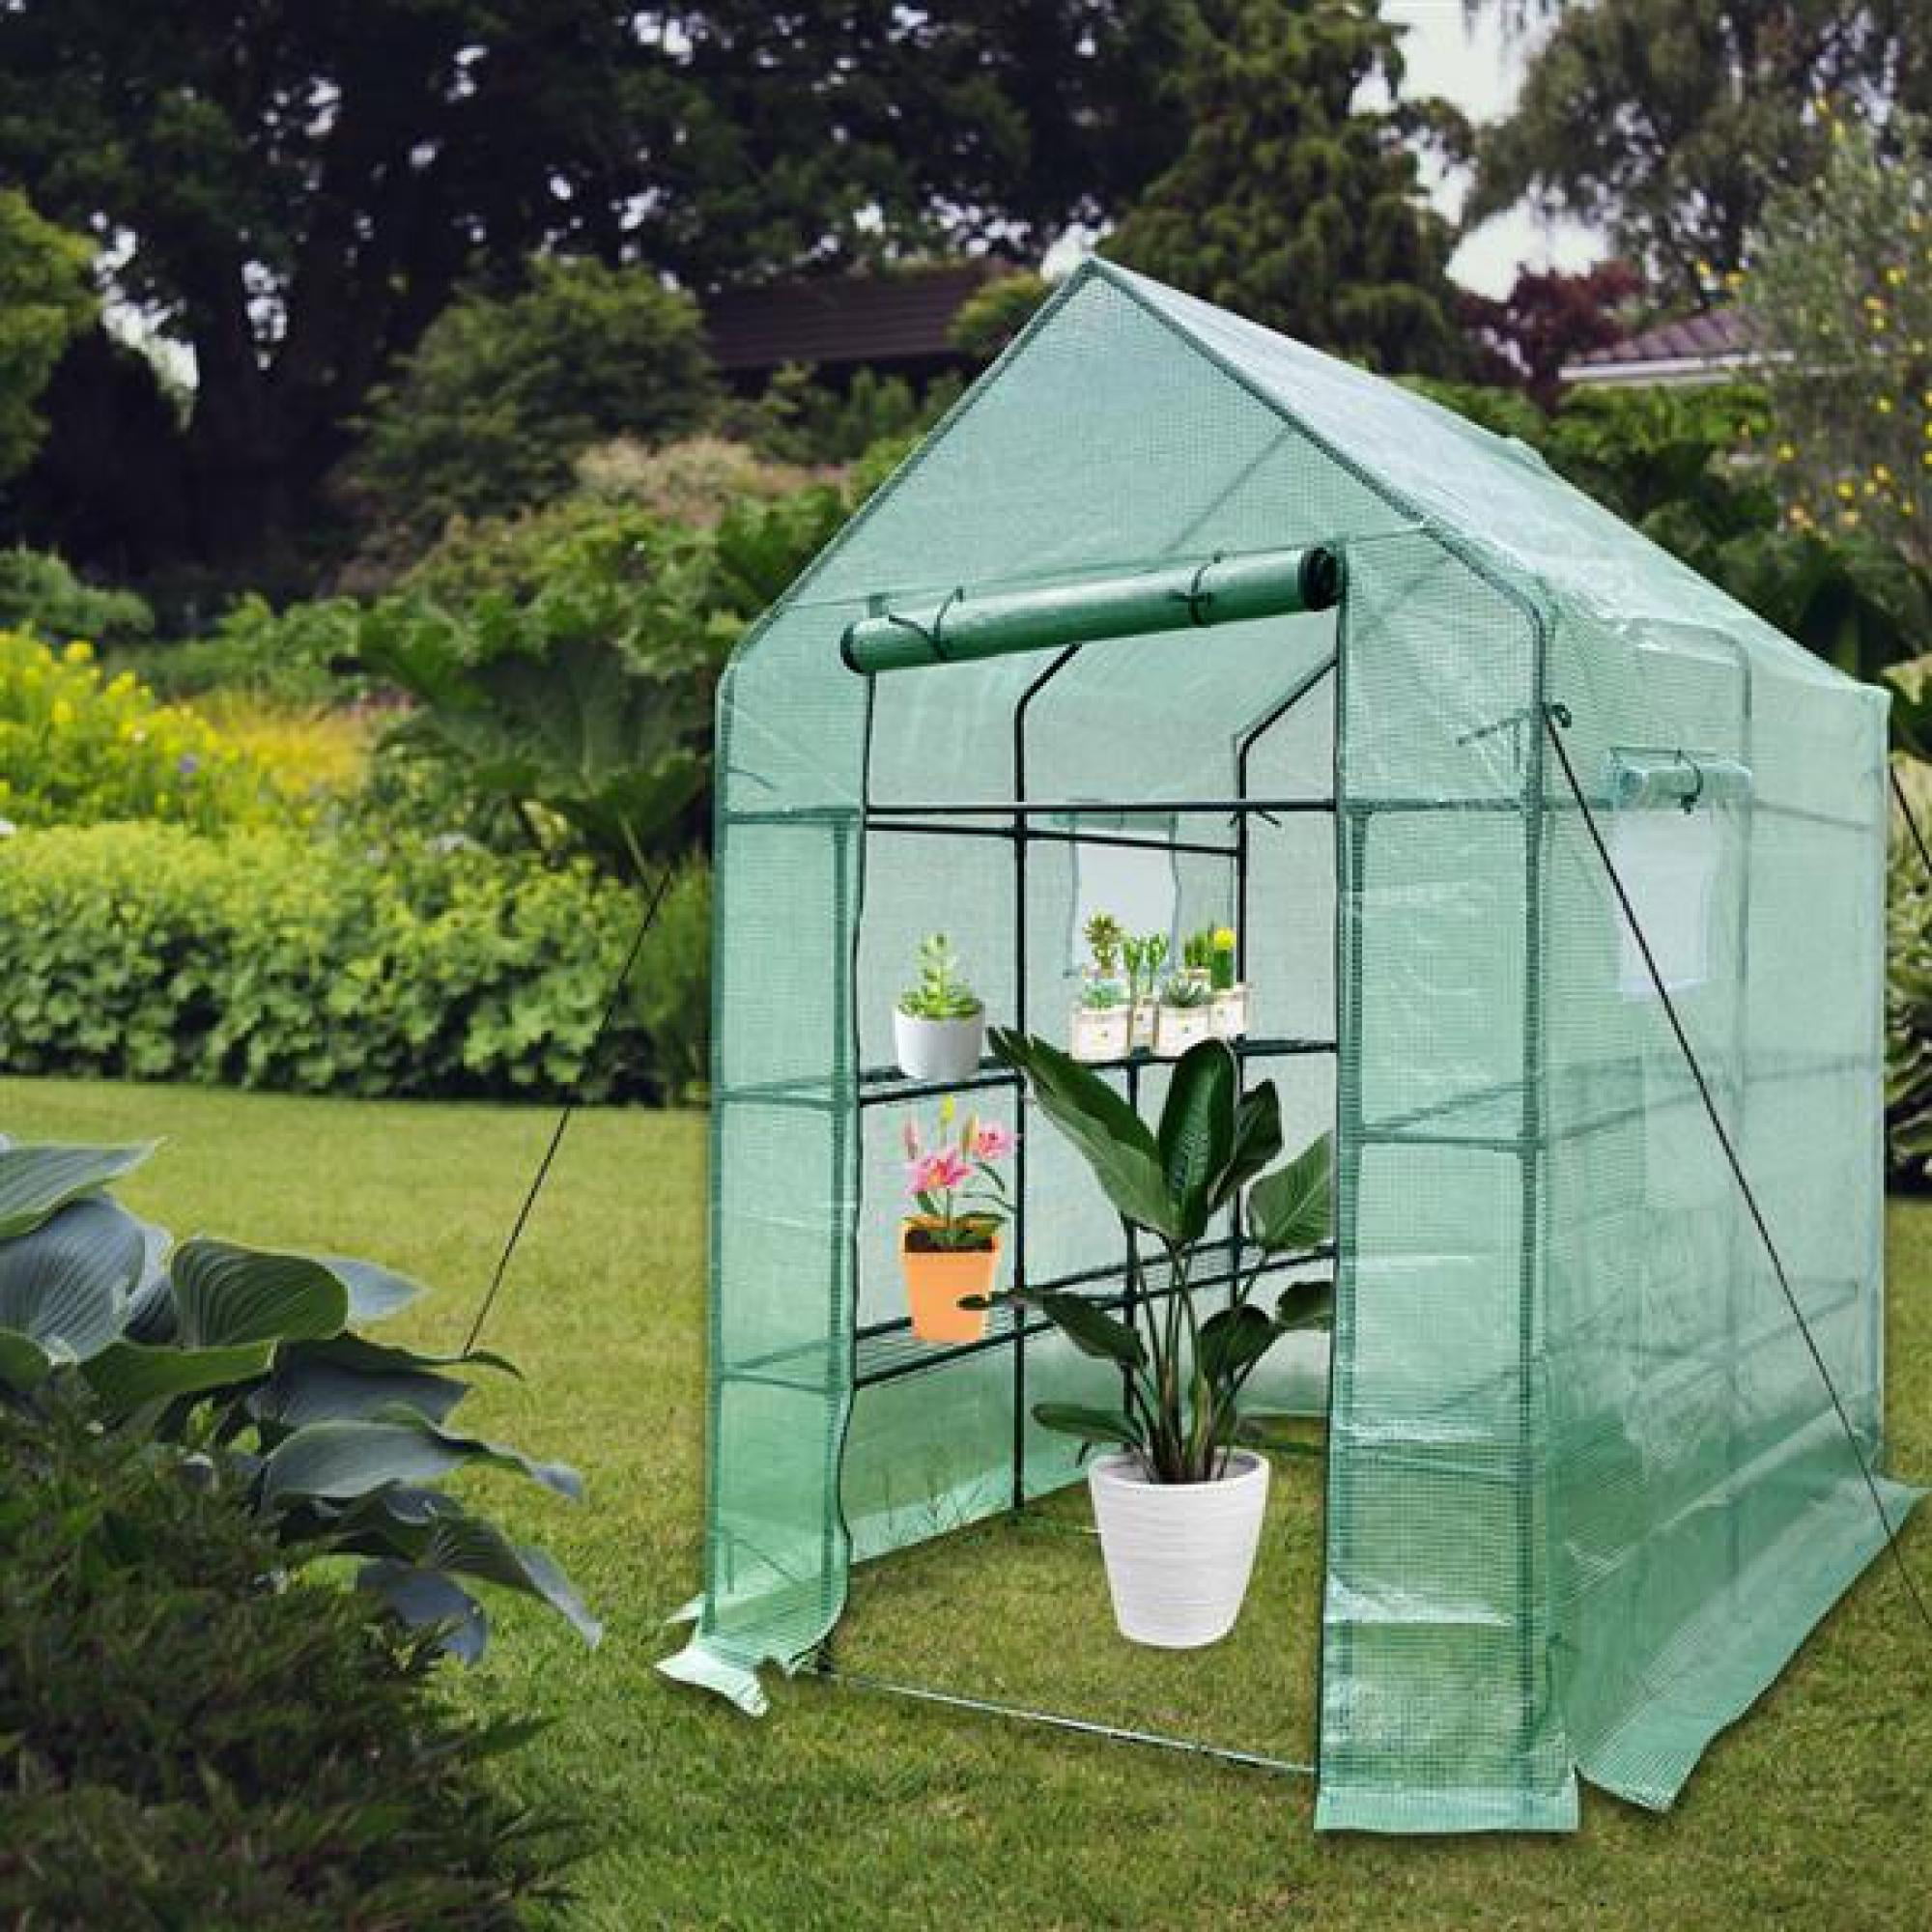 56×30×76 Greenhouse,Indoor and Outdoor Greenhouse,Window and Anchors Include,Grow Plants Seedlings Herbs or Flowers 